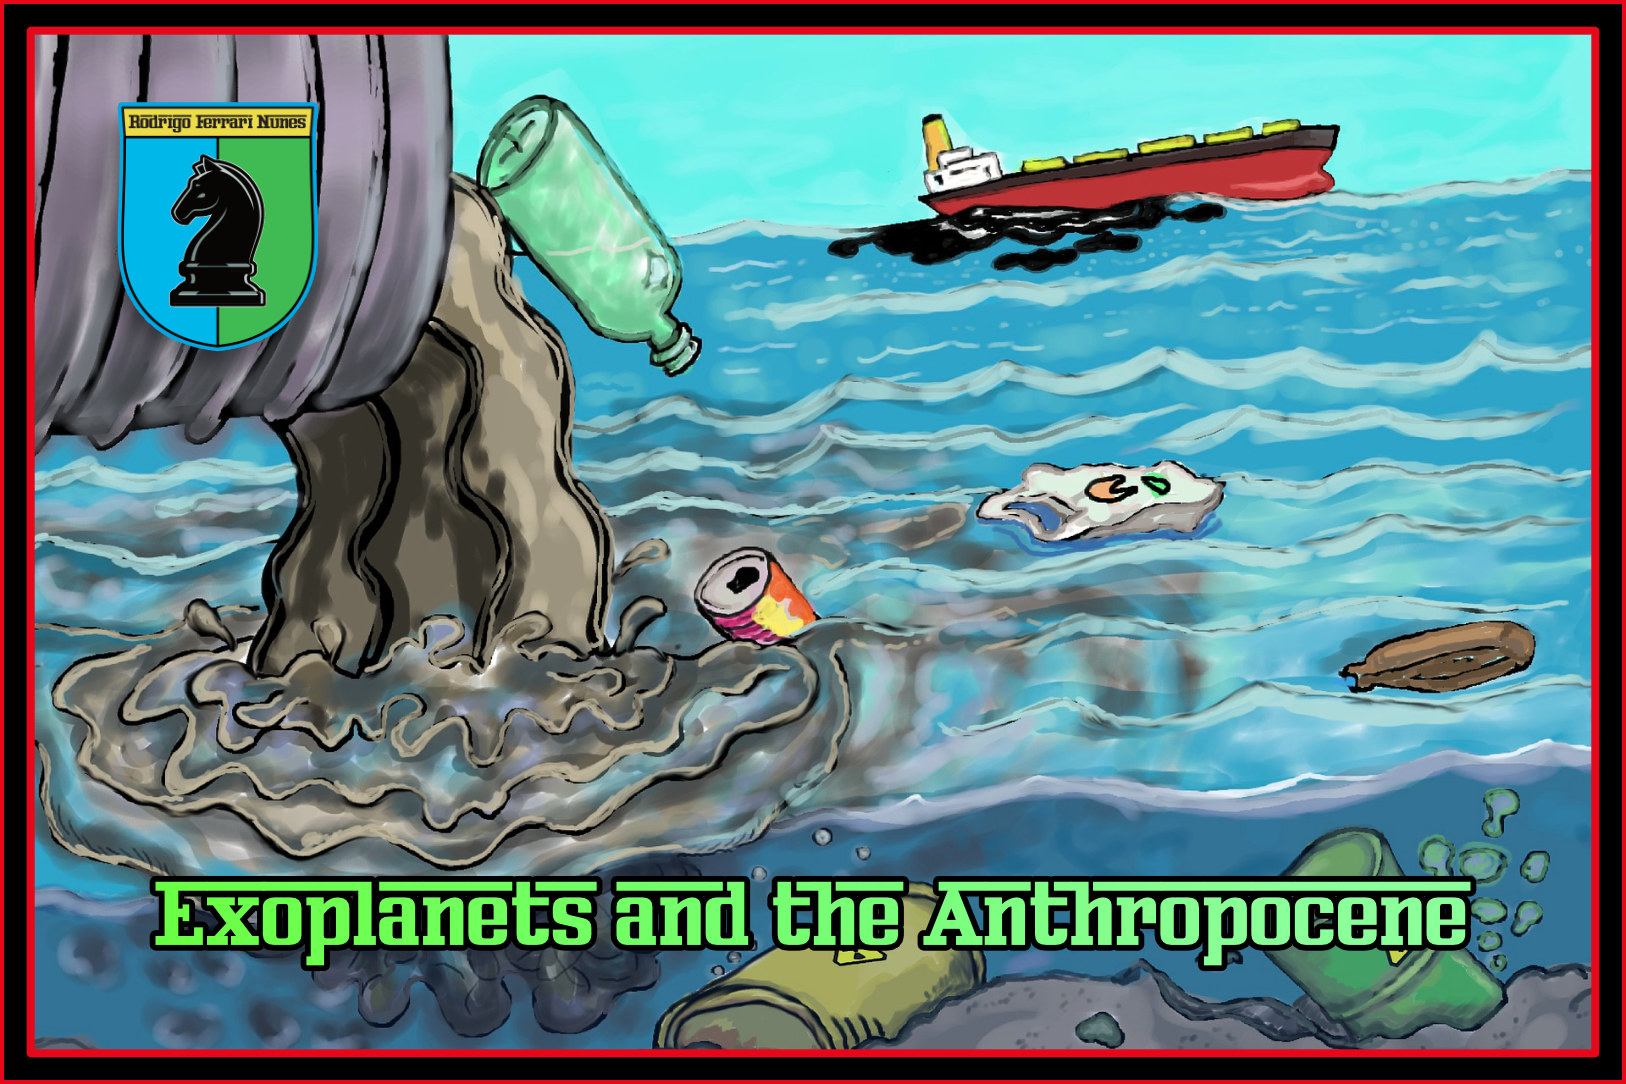 EXOPLANETS AND THE ANTHROPOCENE